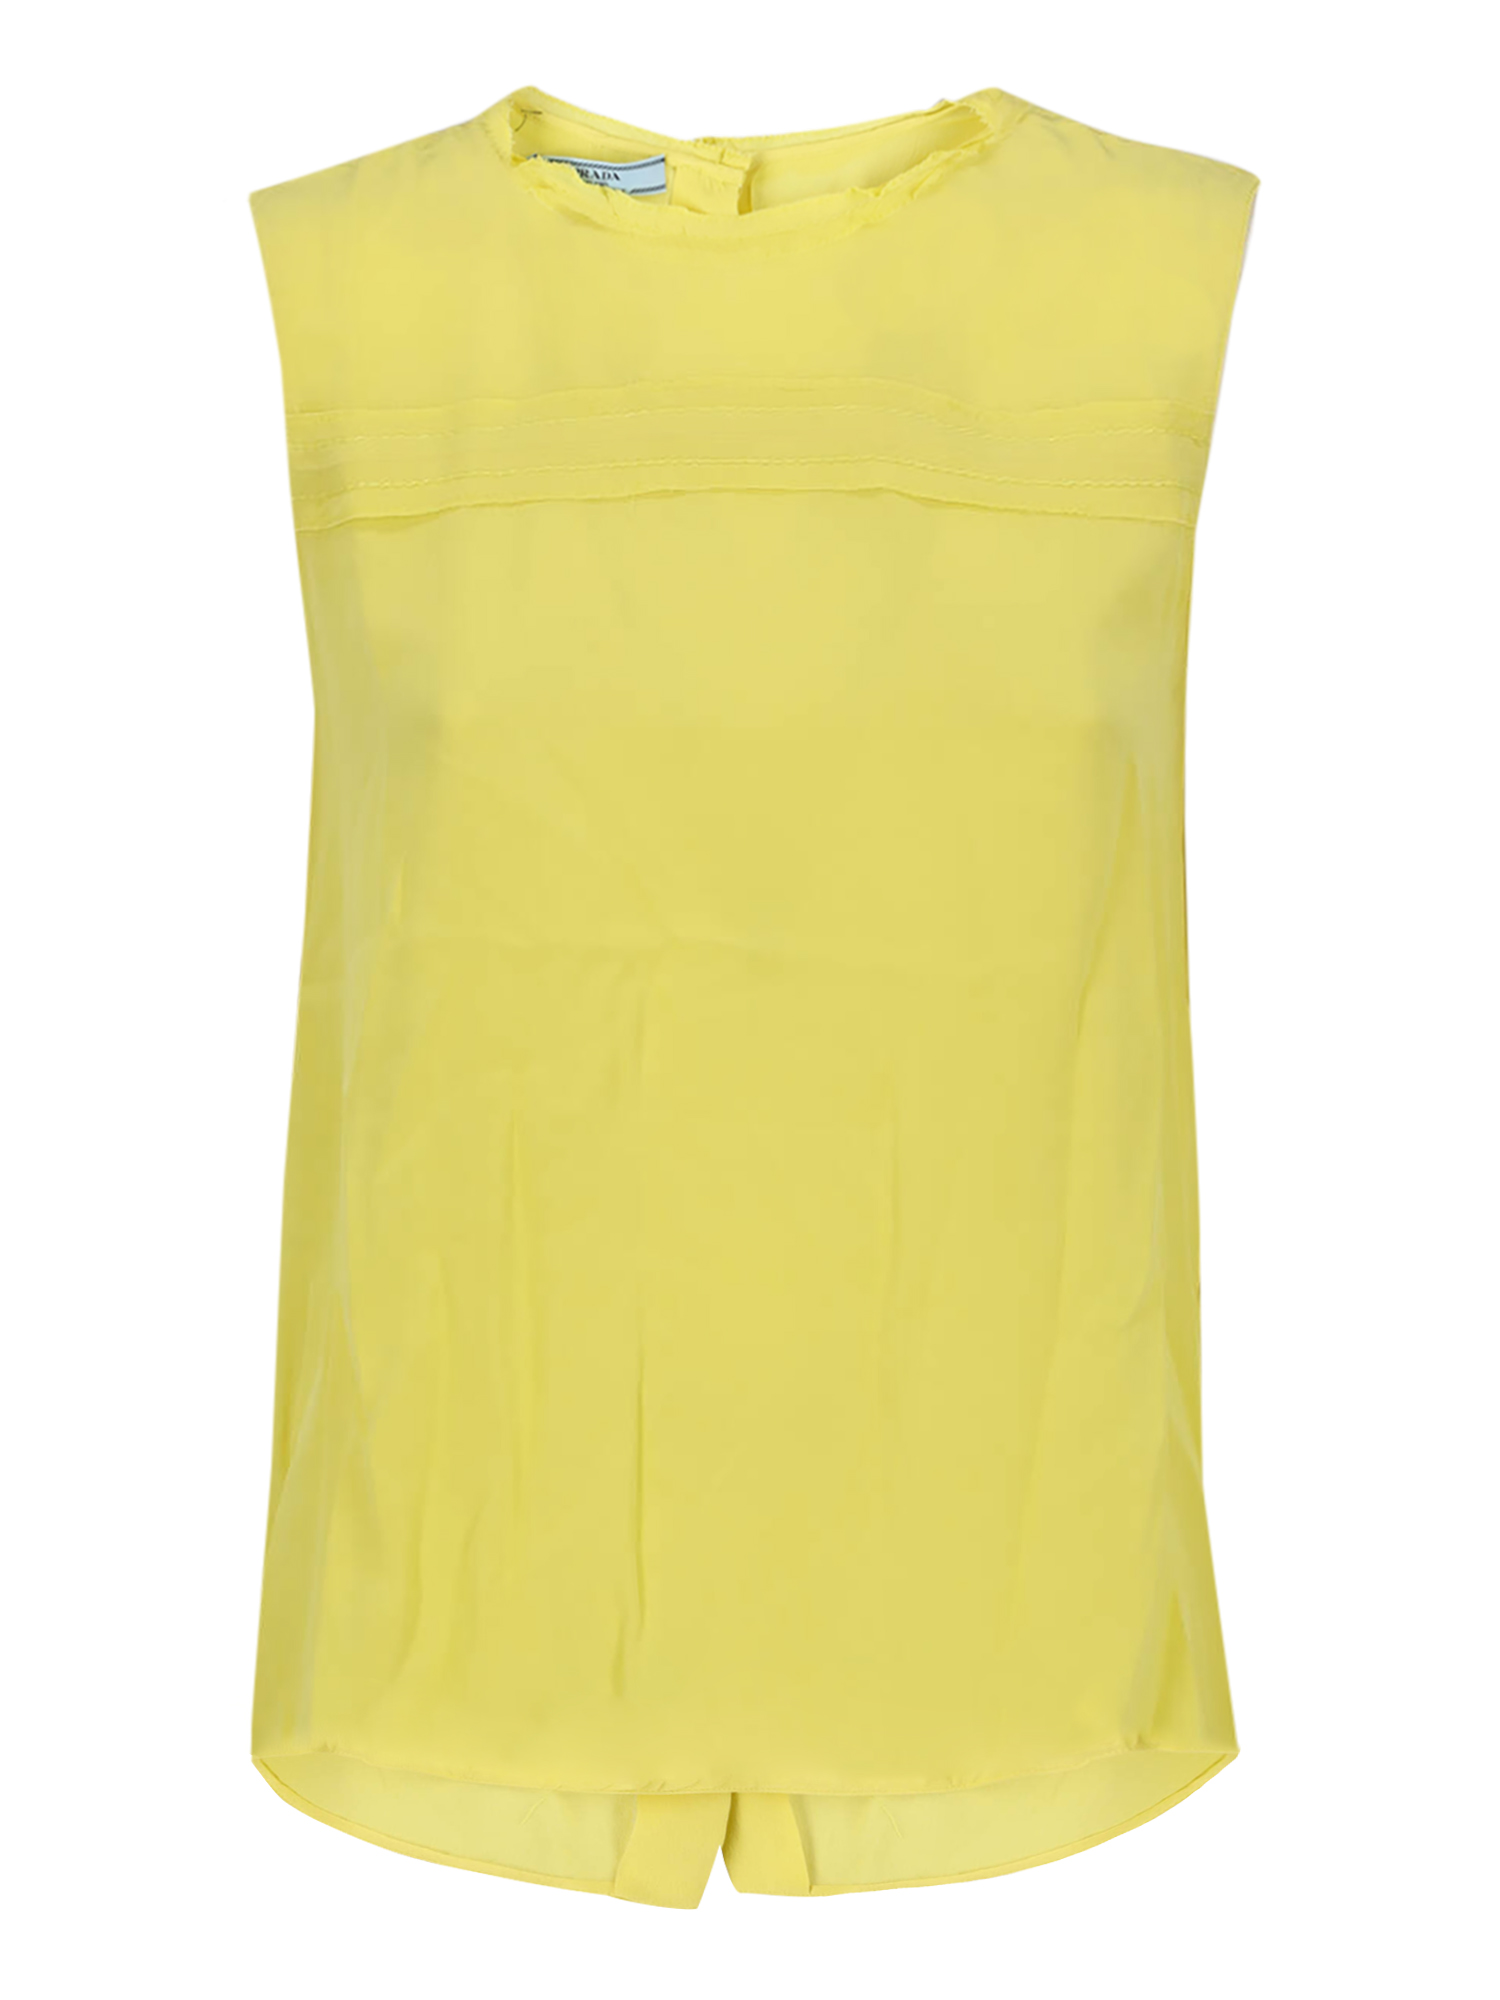 Prada - Condition: good, solid color fabric, color: yellow - s - it 40 -